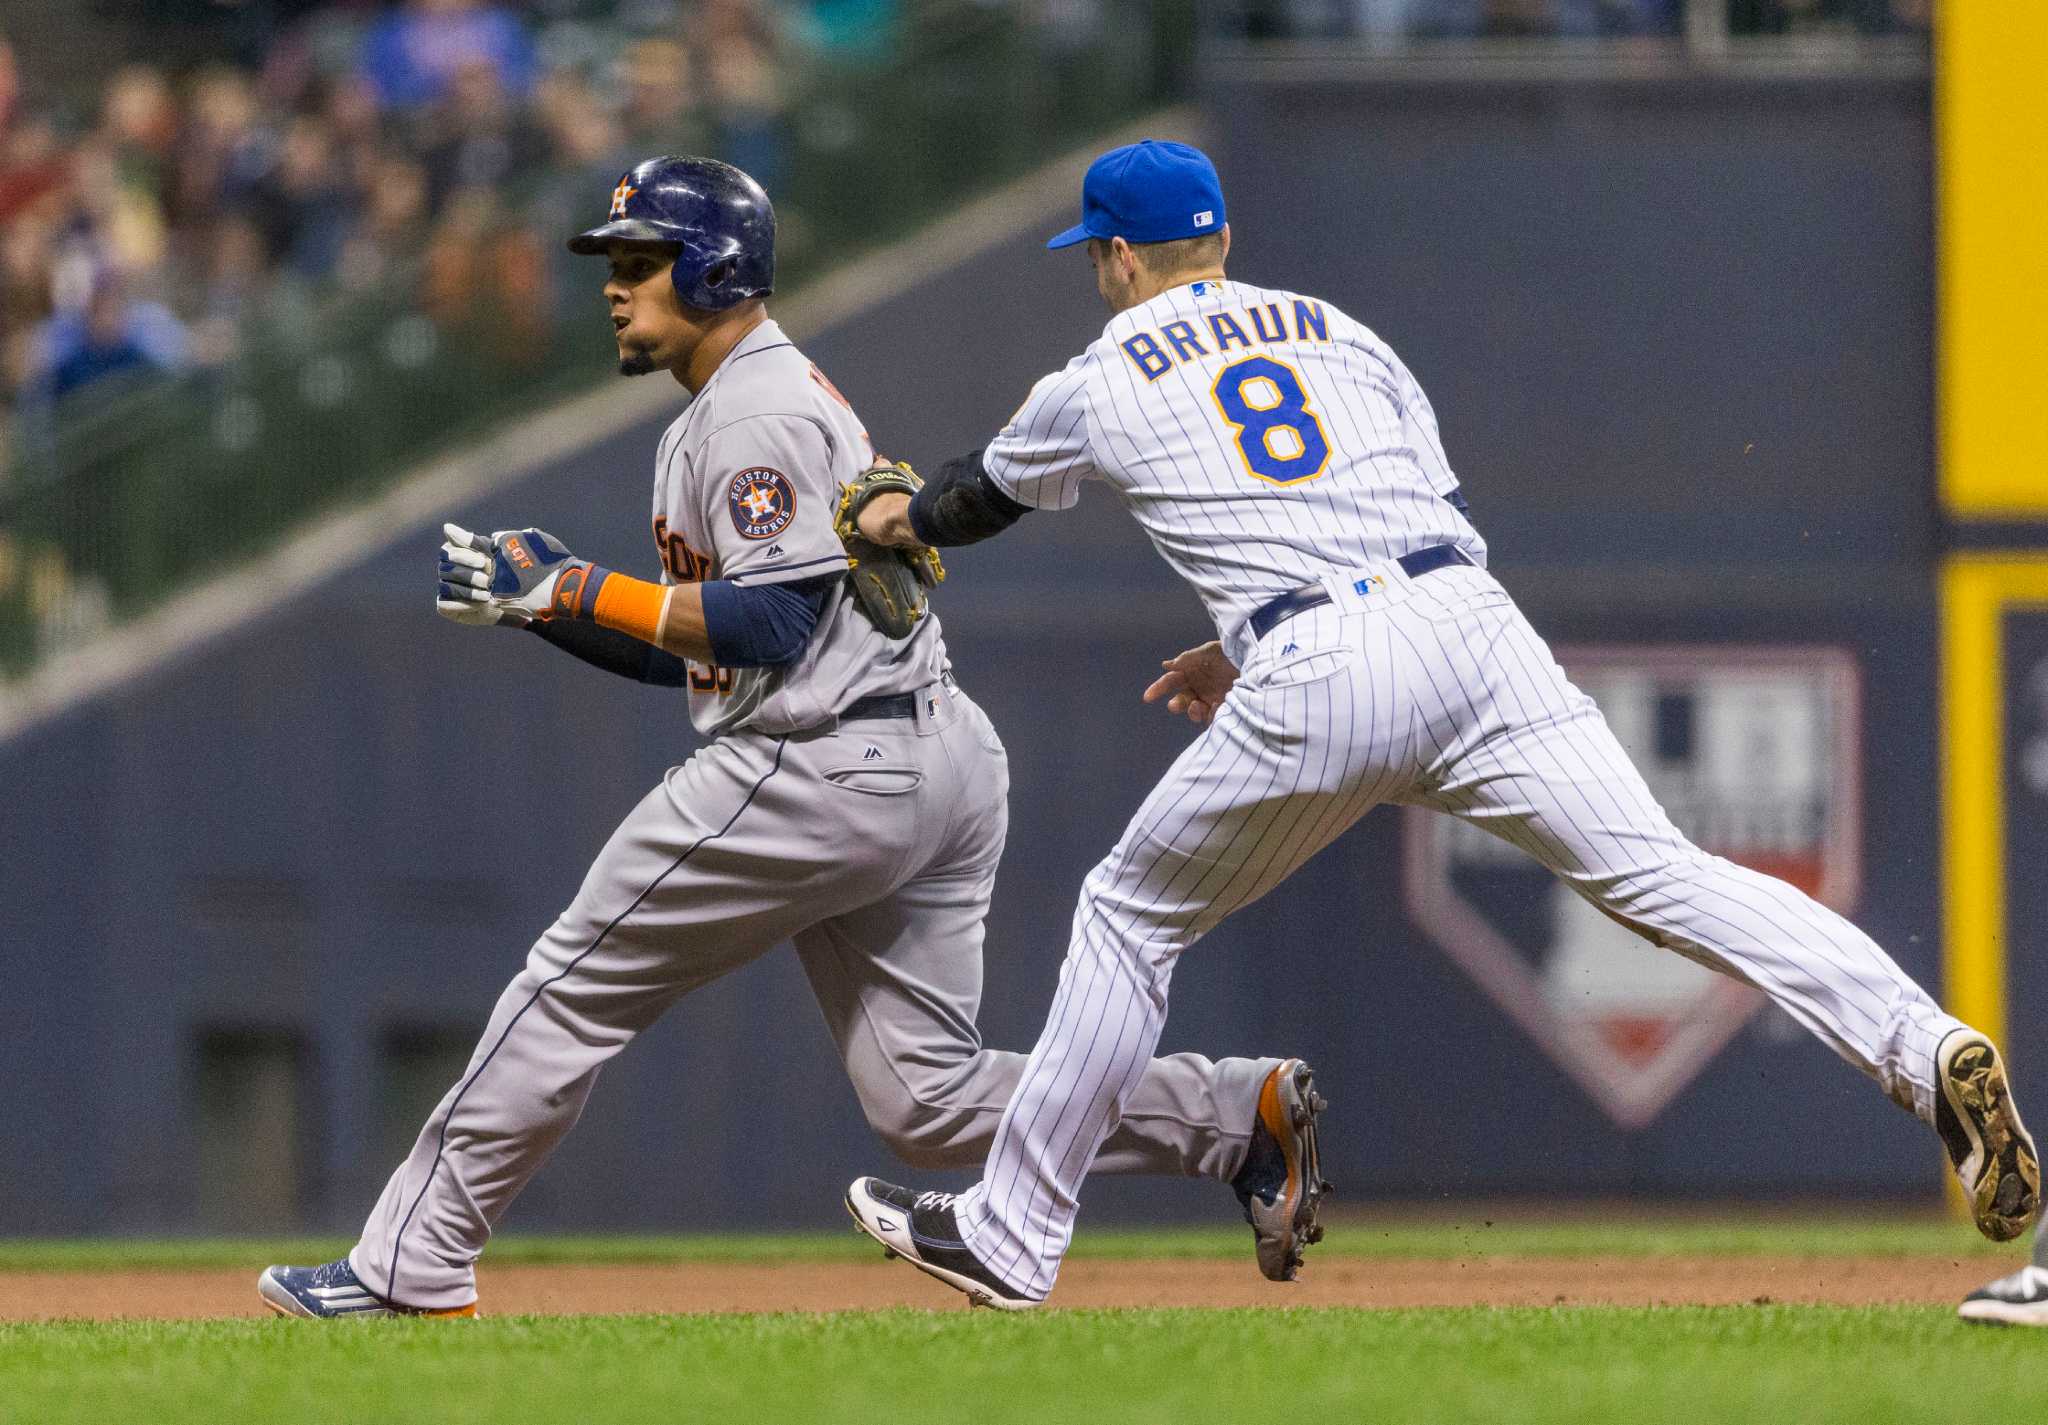 Astros report: Carlos Gomez feels 'weird' as visitor at Miller Park